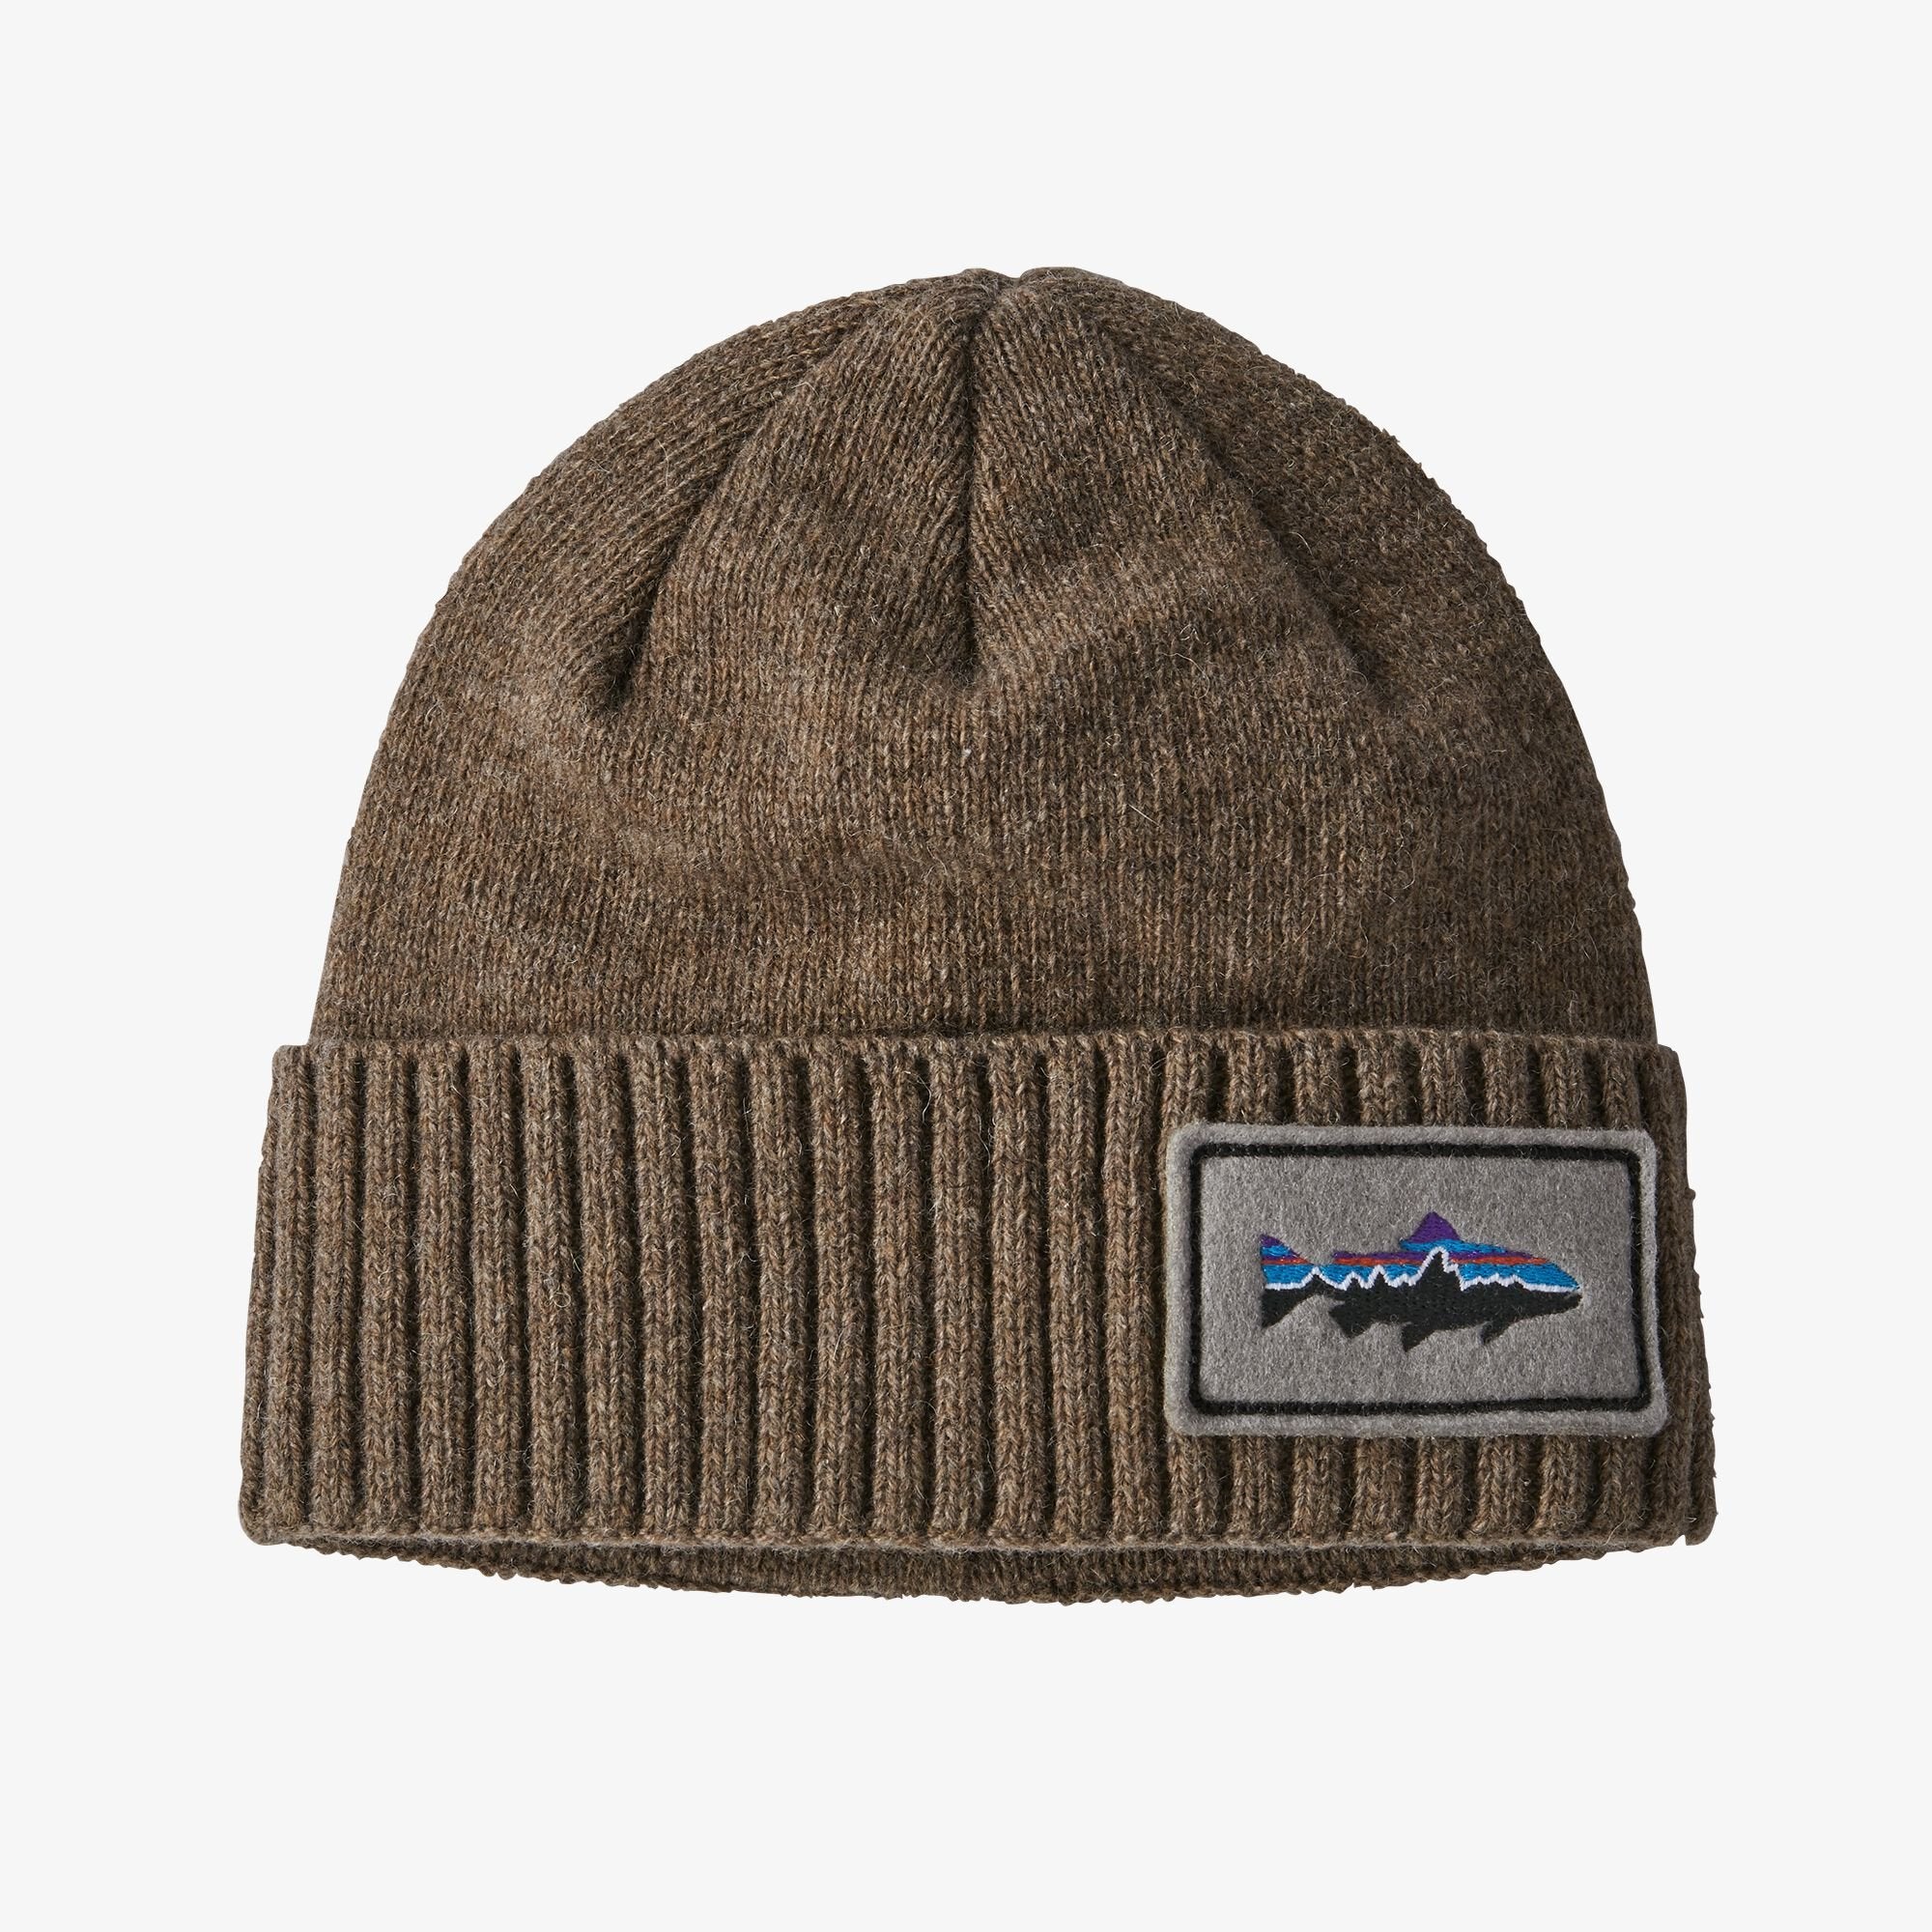 Patagonia Brodeo Beanie - Fitz Roy Trout Patch / Ash Tan